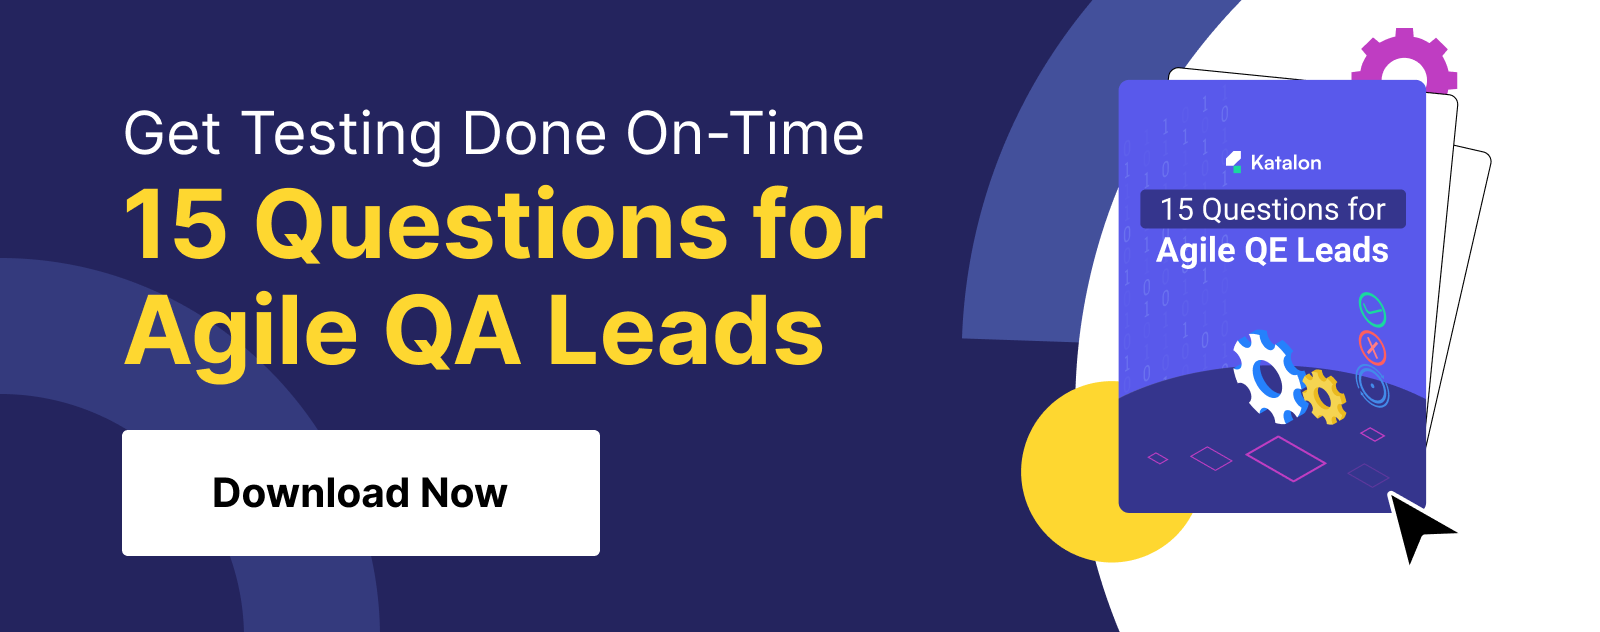 Get testing done on-time 15 questions for Agile QA Leads